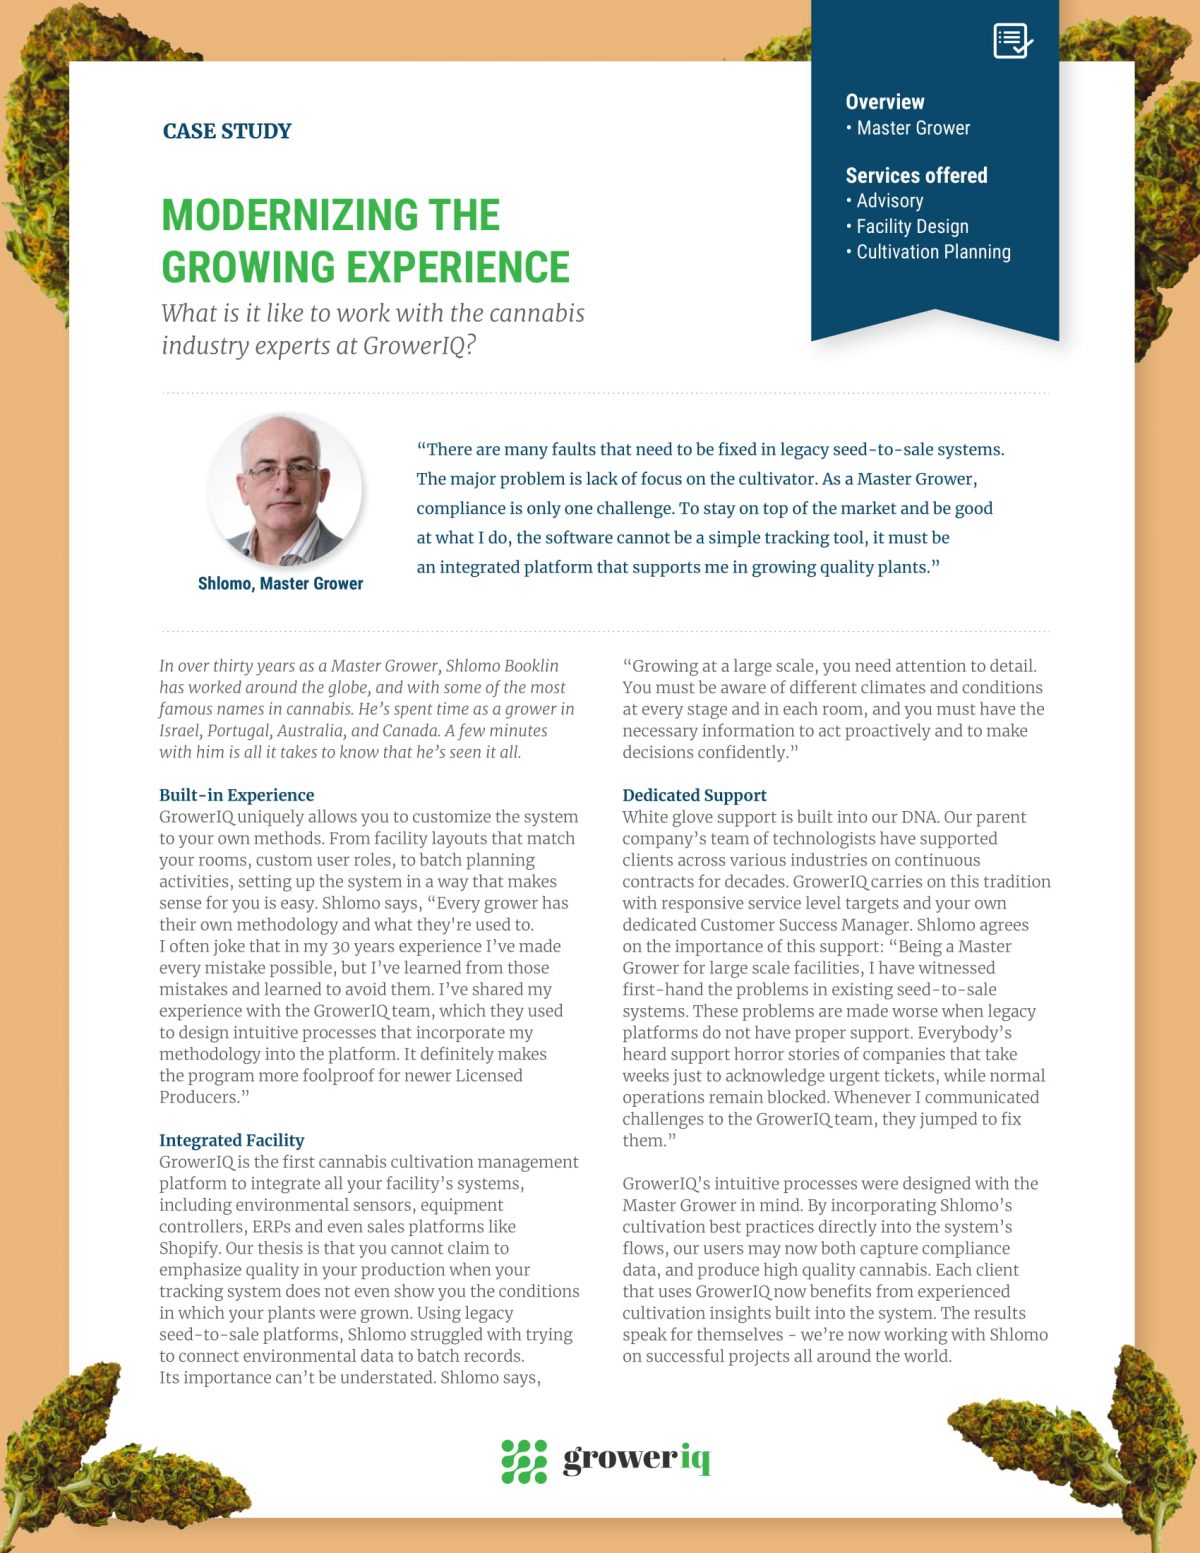 Master Grower Case Study: Modernizing the Growing Experience